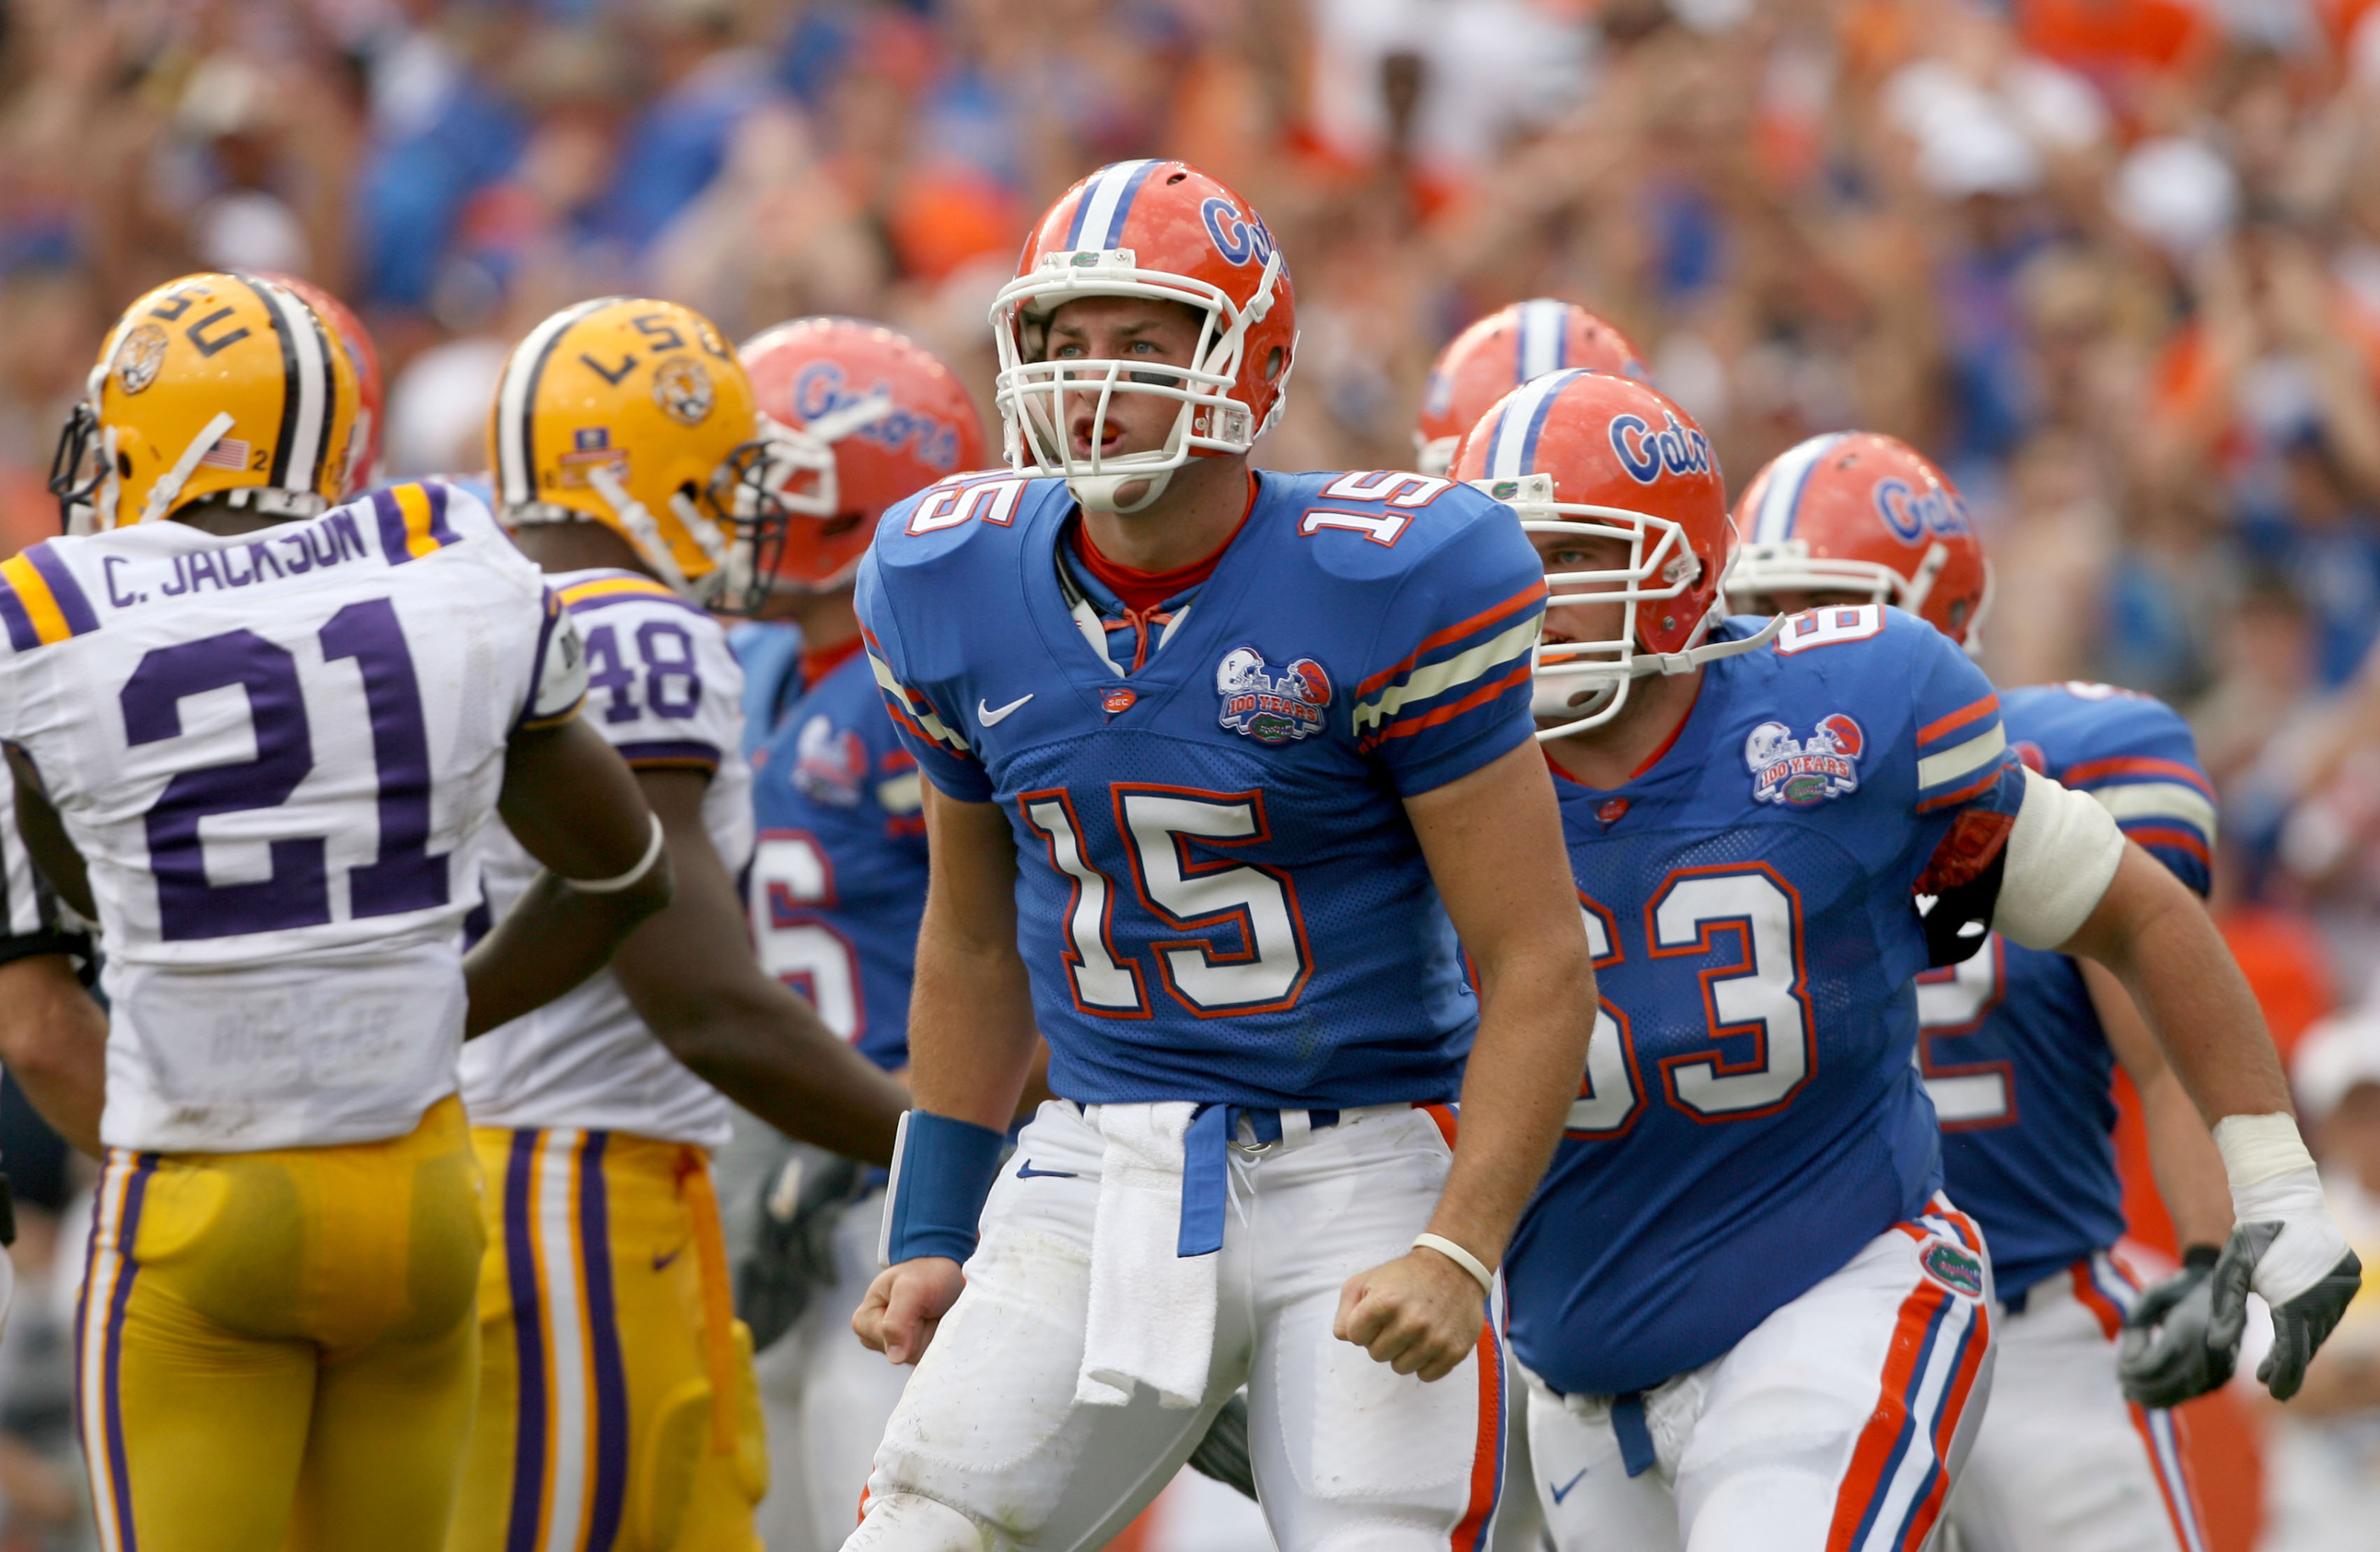 Florida quarterback Tim Tebow (15) during the game between the